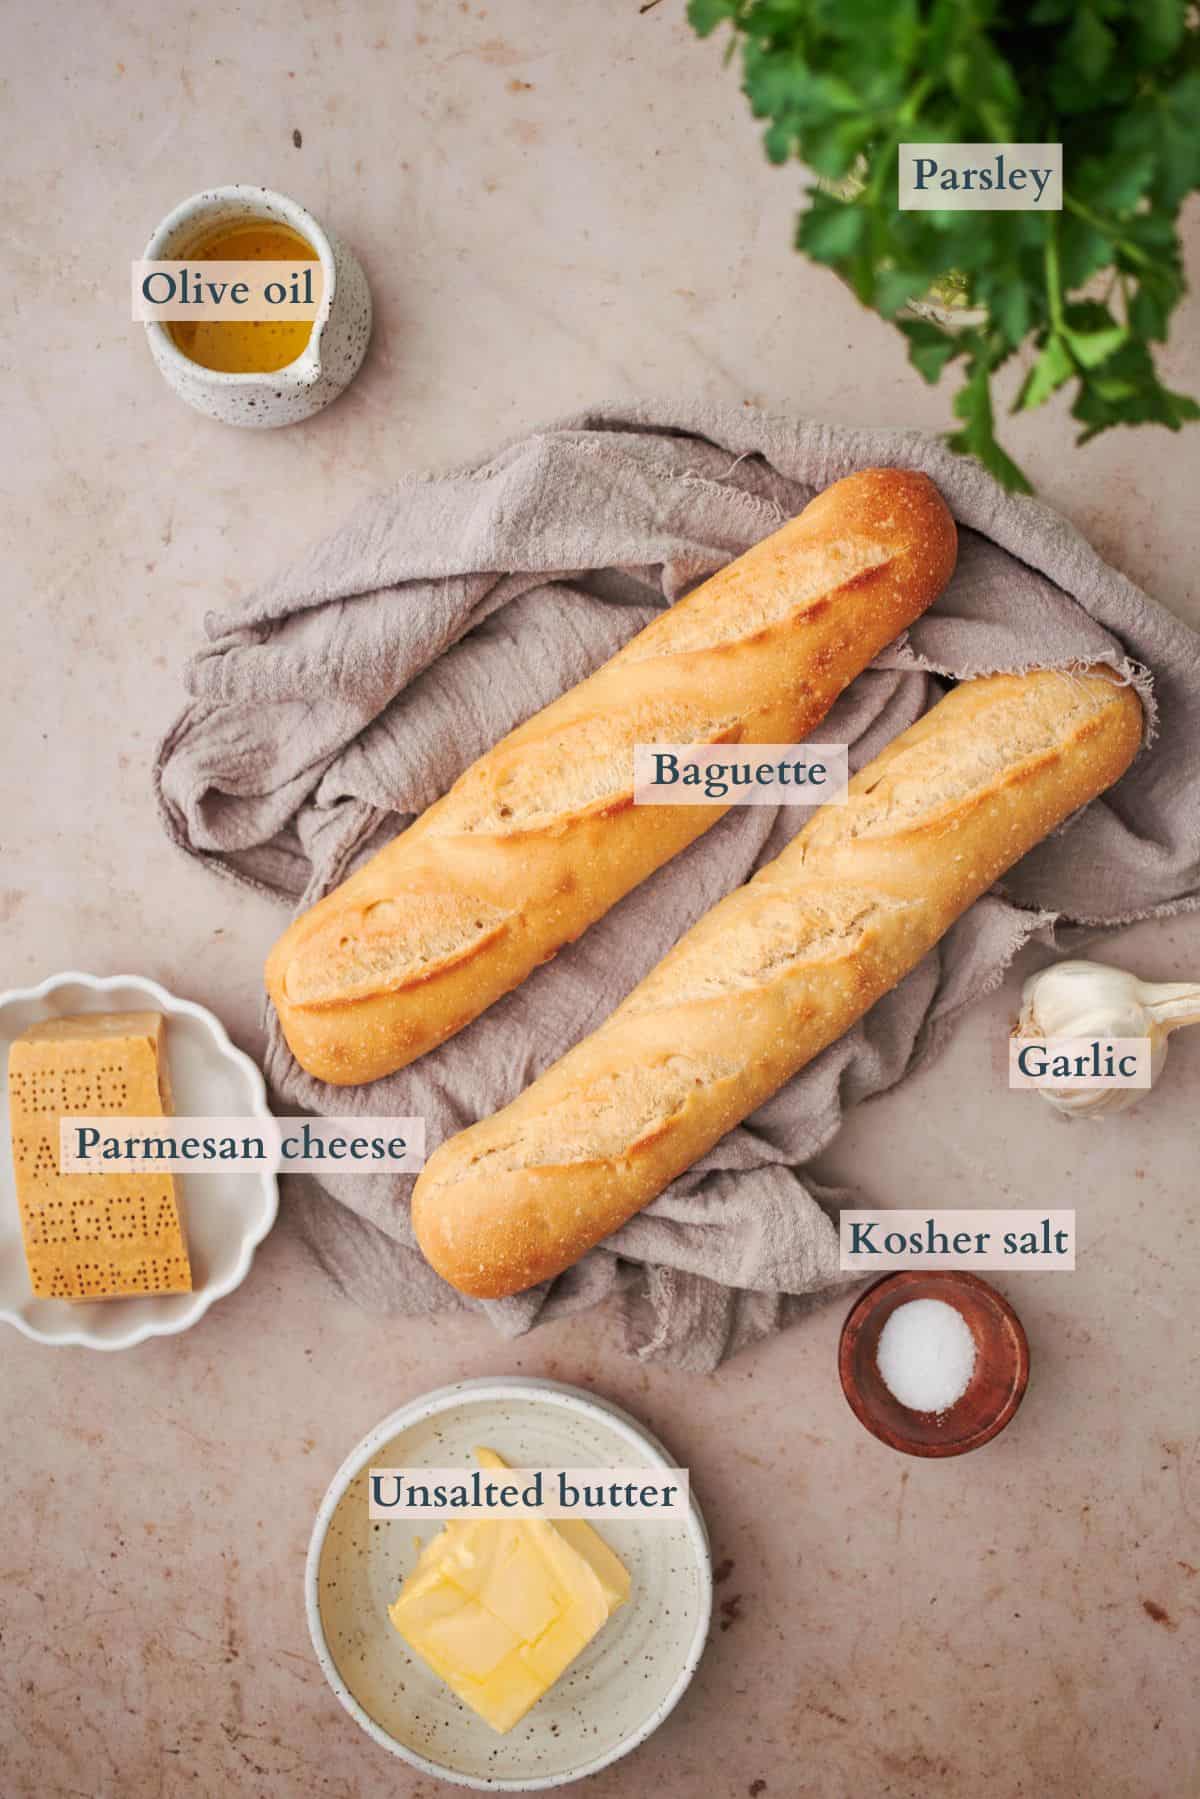 ingredients to make garlic bread laid out in small bowls and labeled to denote each ingredient.